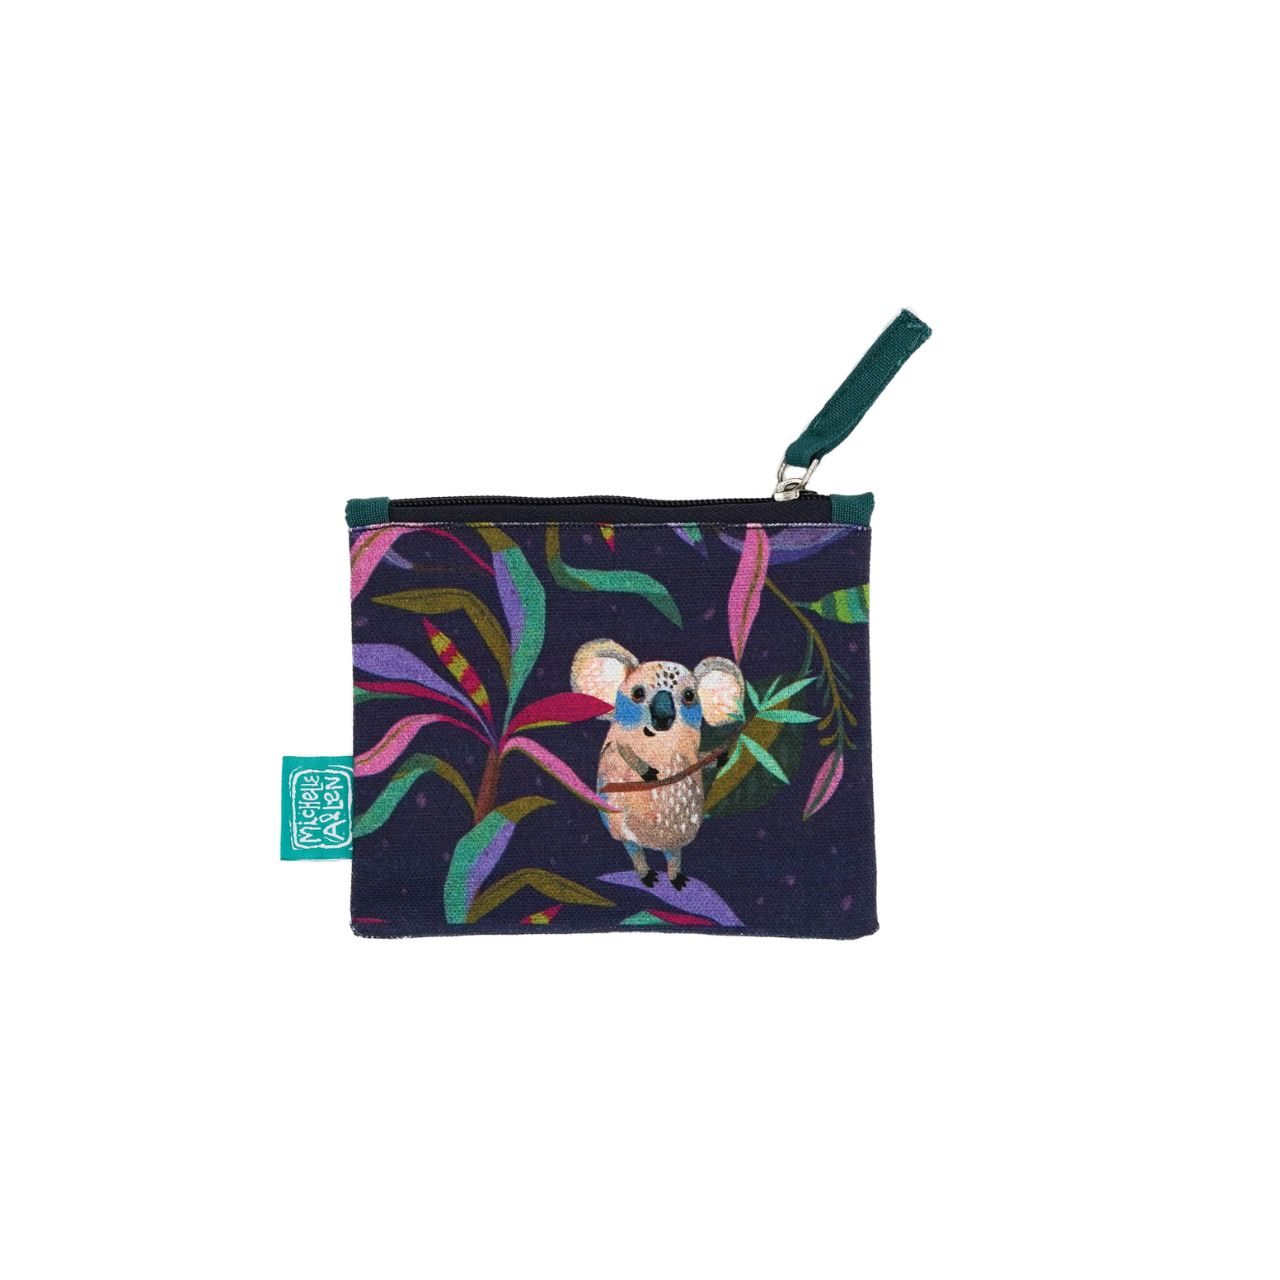 Michelle Allen Koala Zipped Pouch Small  These beautiful zippered 100% Cotton pouches are perfect for pencils/pens, trinkets, charging cords, make up or pretty much anything you can possibly think of. Exclusively designed by Michelle Allen.